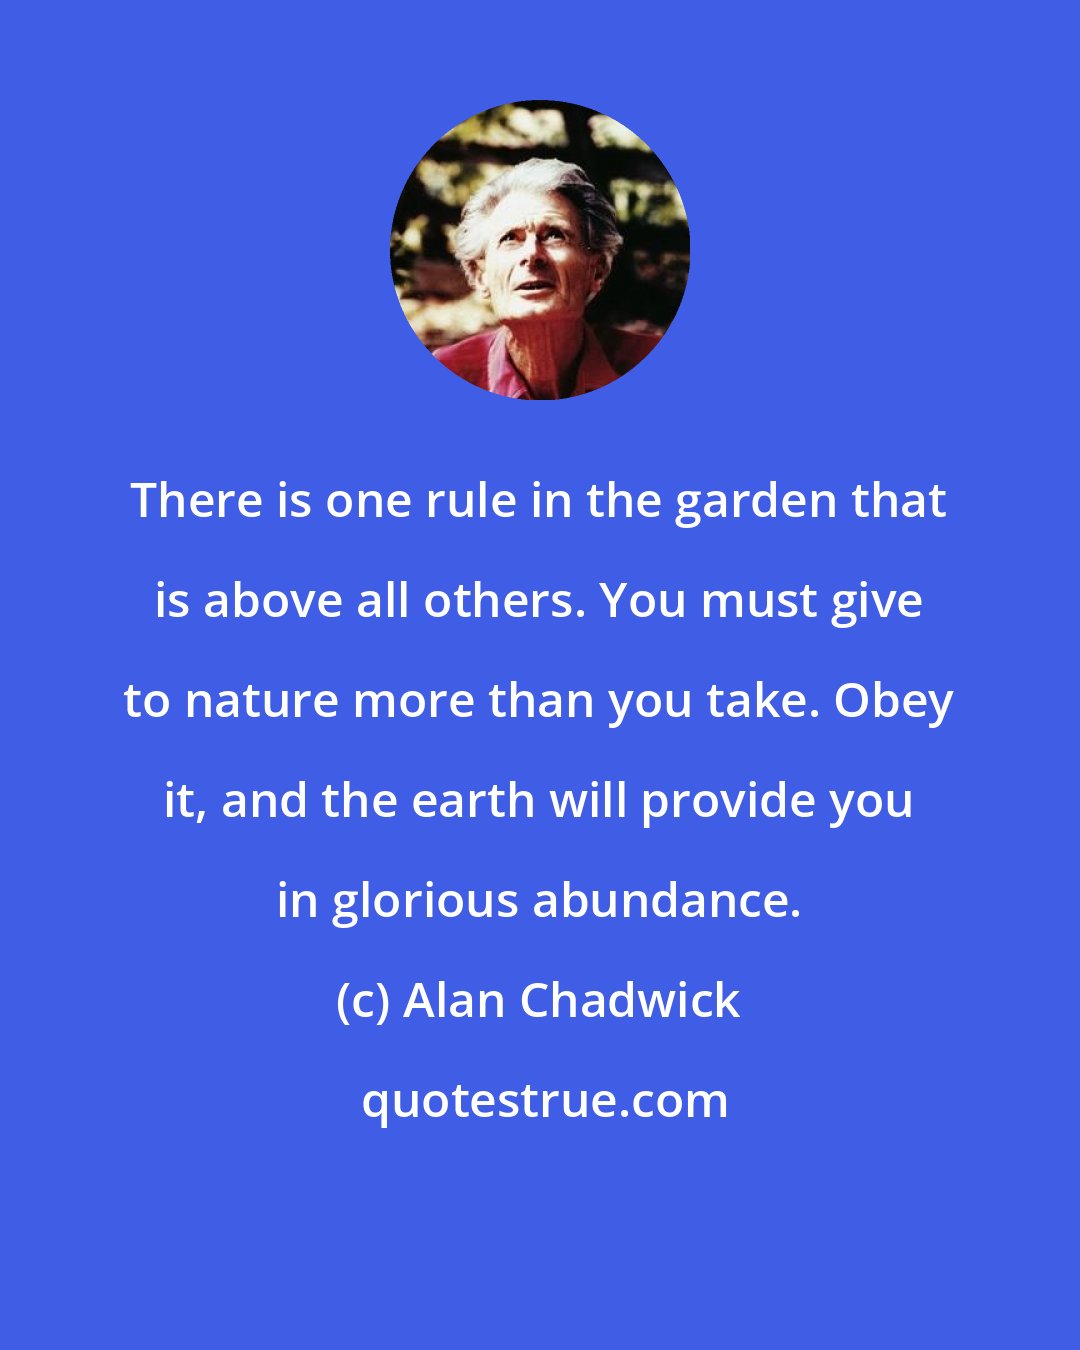 Alan Chadwick: There is one rule in the garden that is above all others. You must give to nature more than you take. Obey it, and the earth will provide you in glorious abundance.